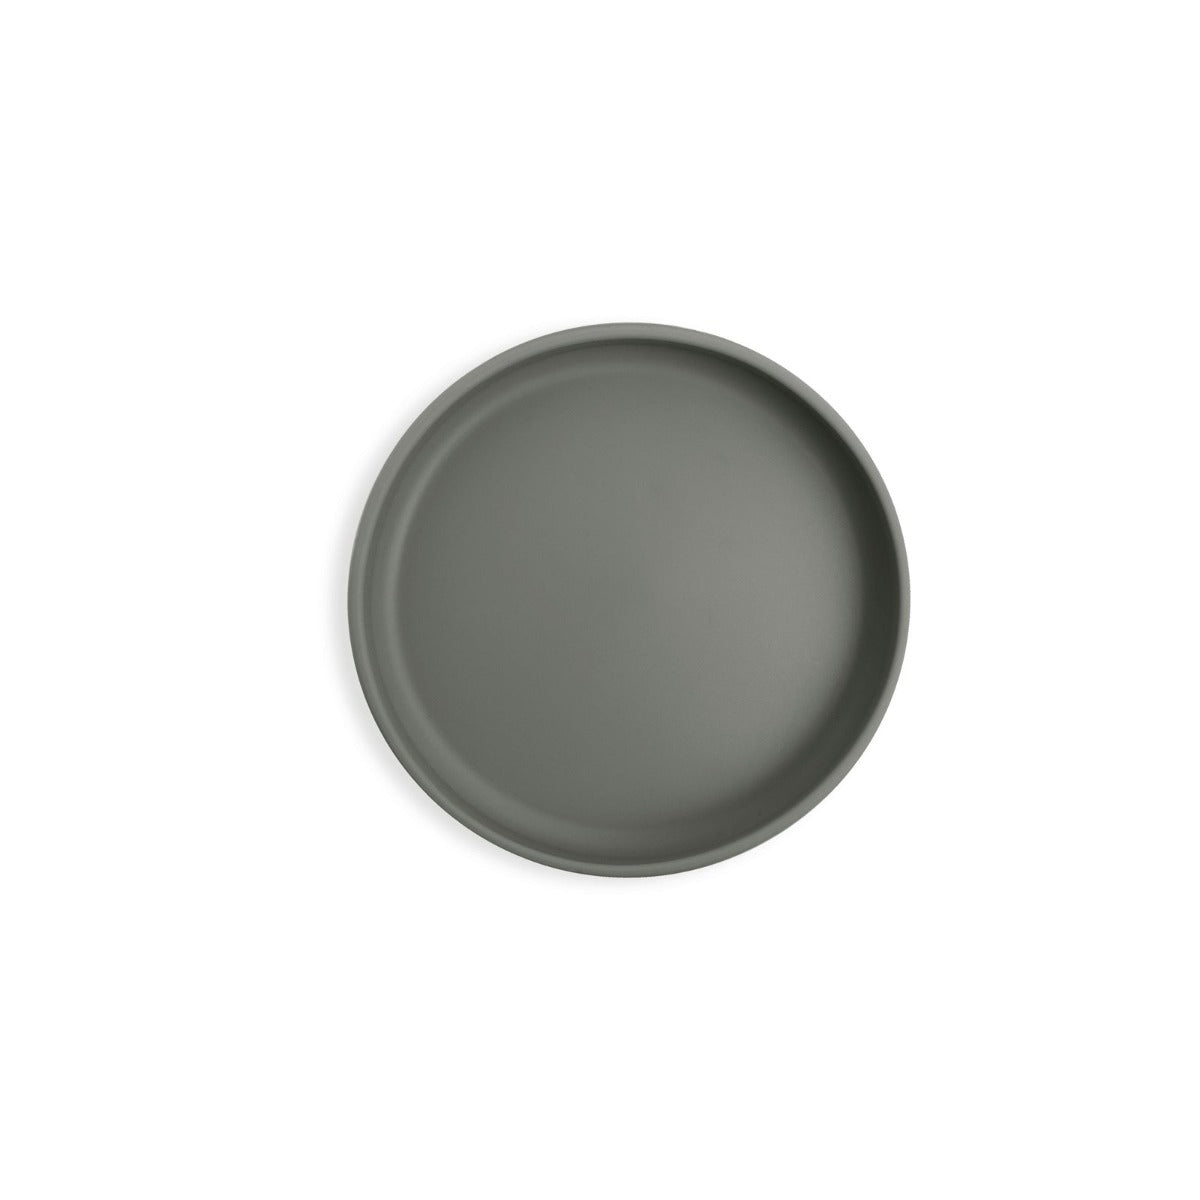 Jones plate top view in olive color